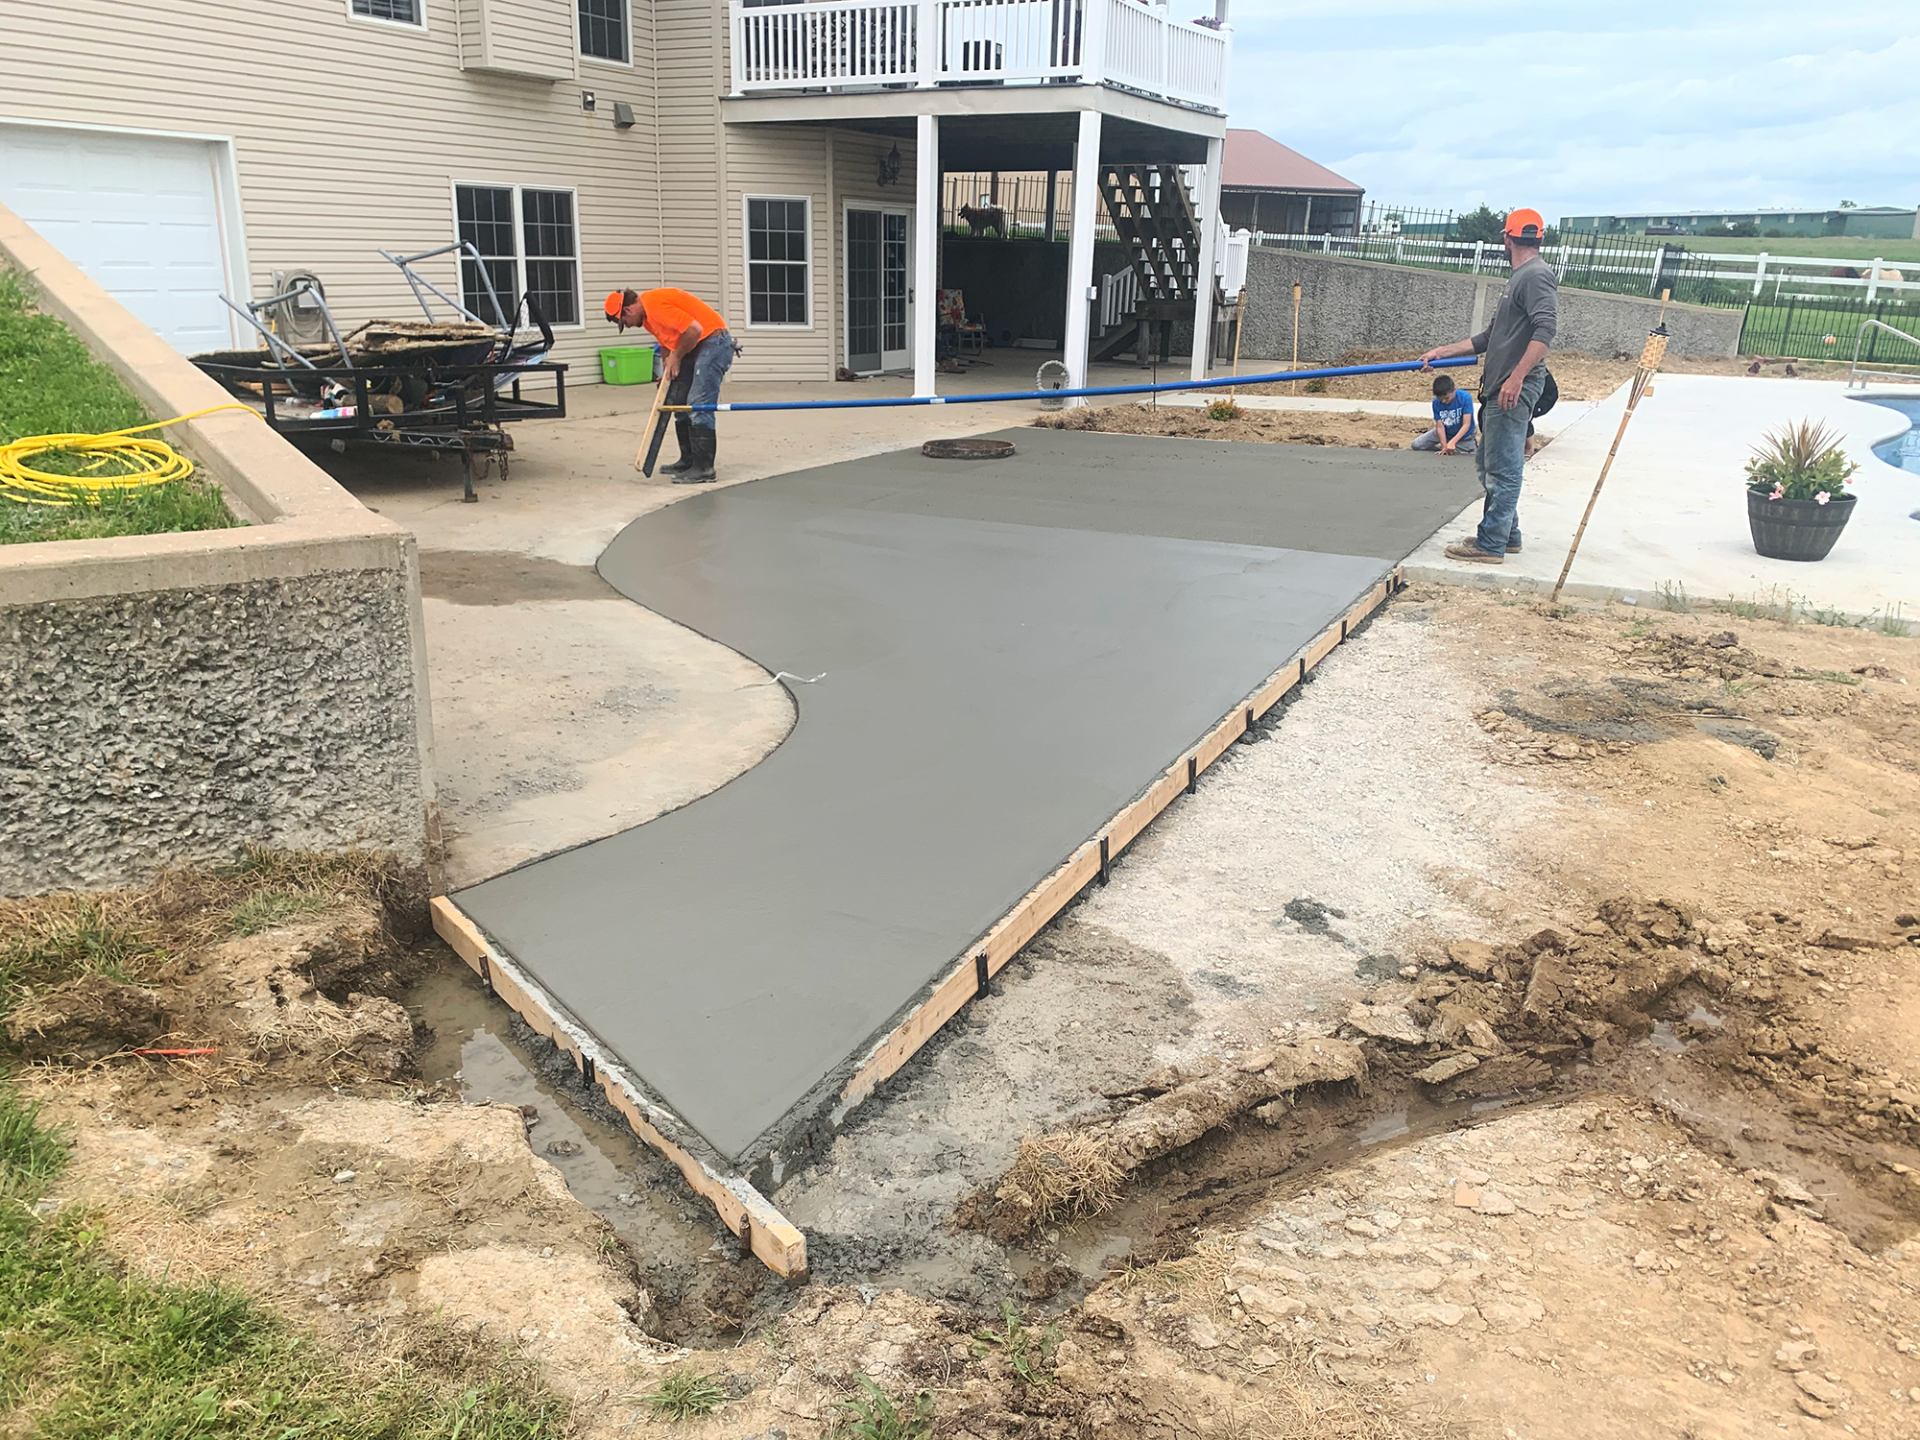 MoSEAL Knows Paving Your Driveway in Moberly, MO Is One of the Most Important Choices You Can Make.